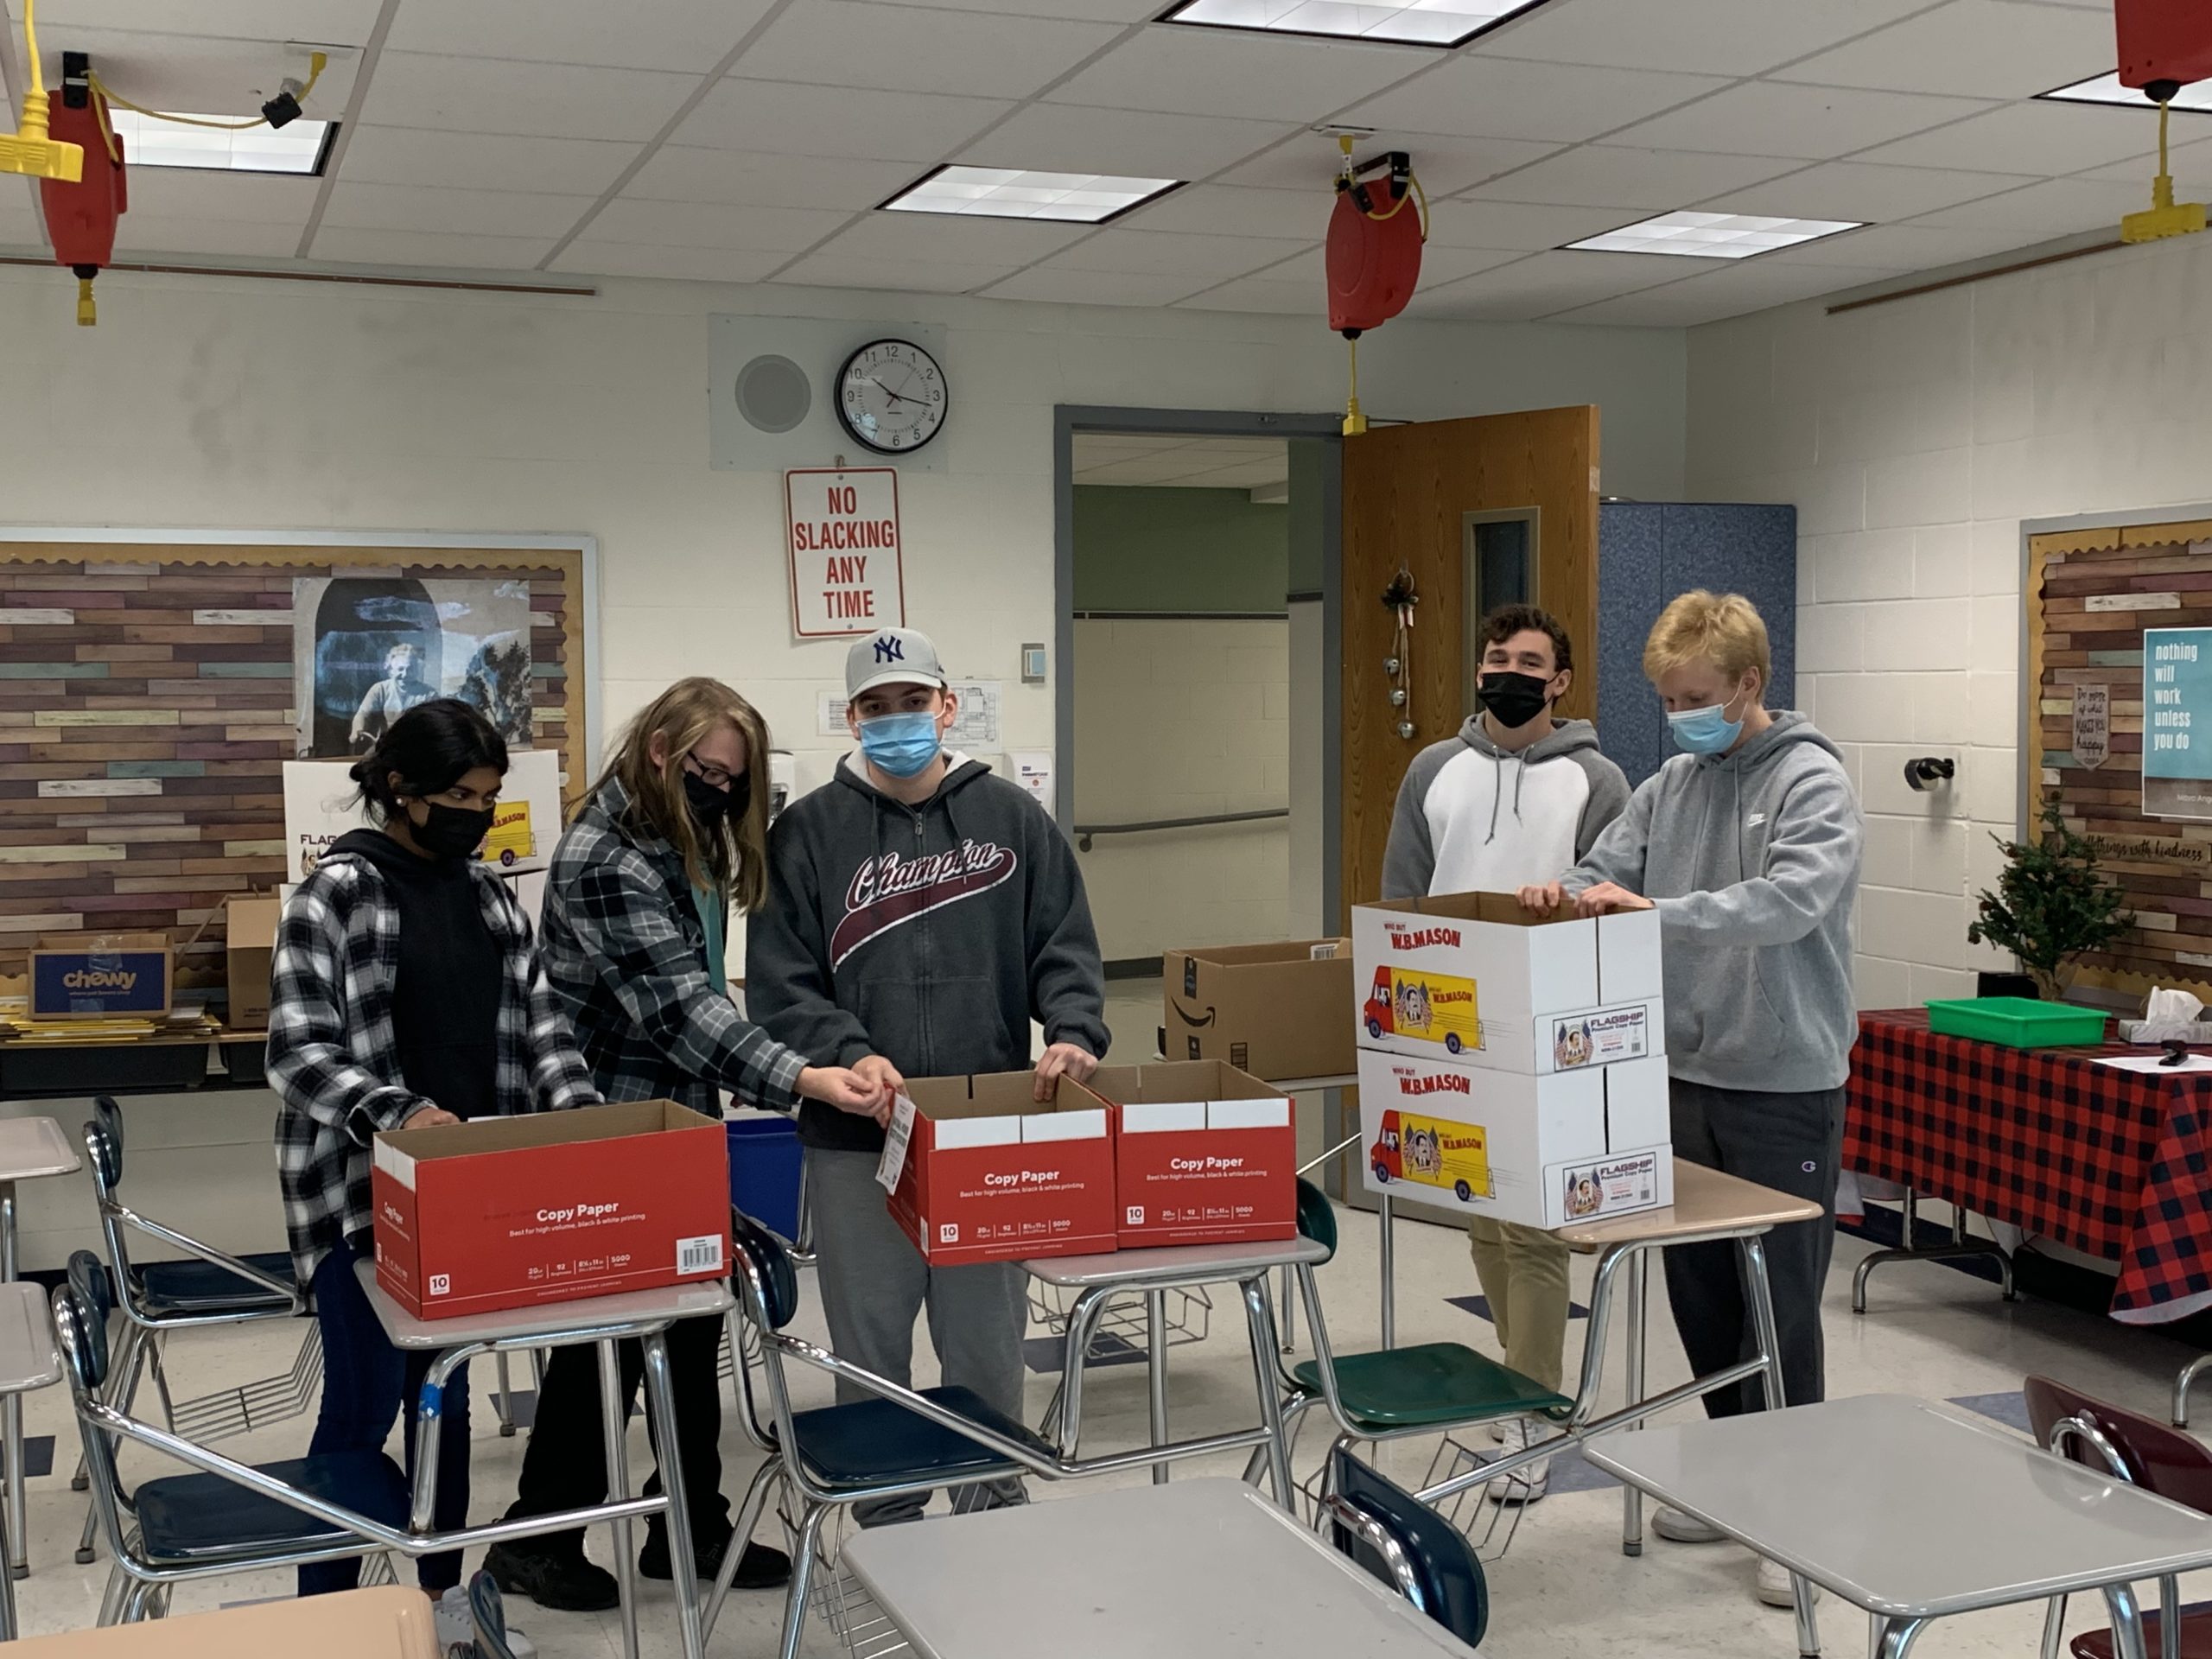 The Westhampton Beach High School National Honor Society recently held a successful holiday food drive in partnership with Long Island Cares. The students collected 789 food items that will be donated to local families in need.